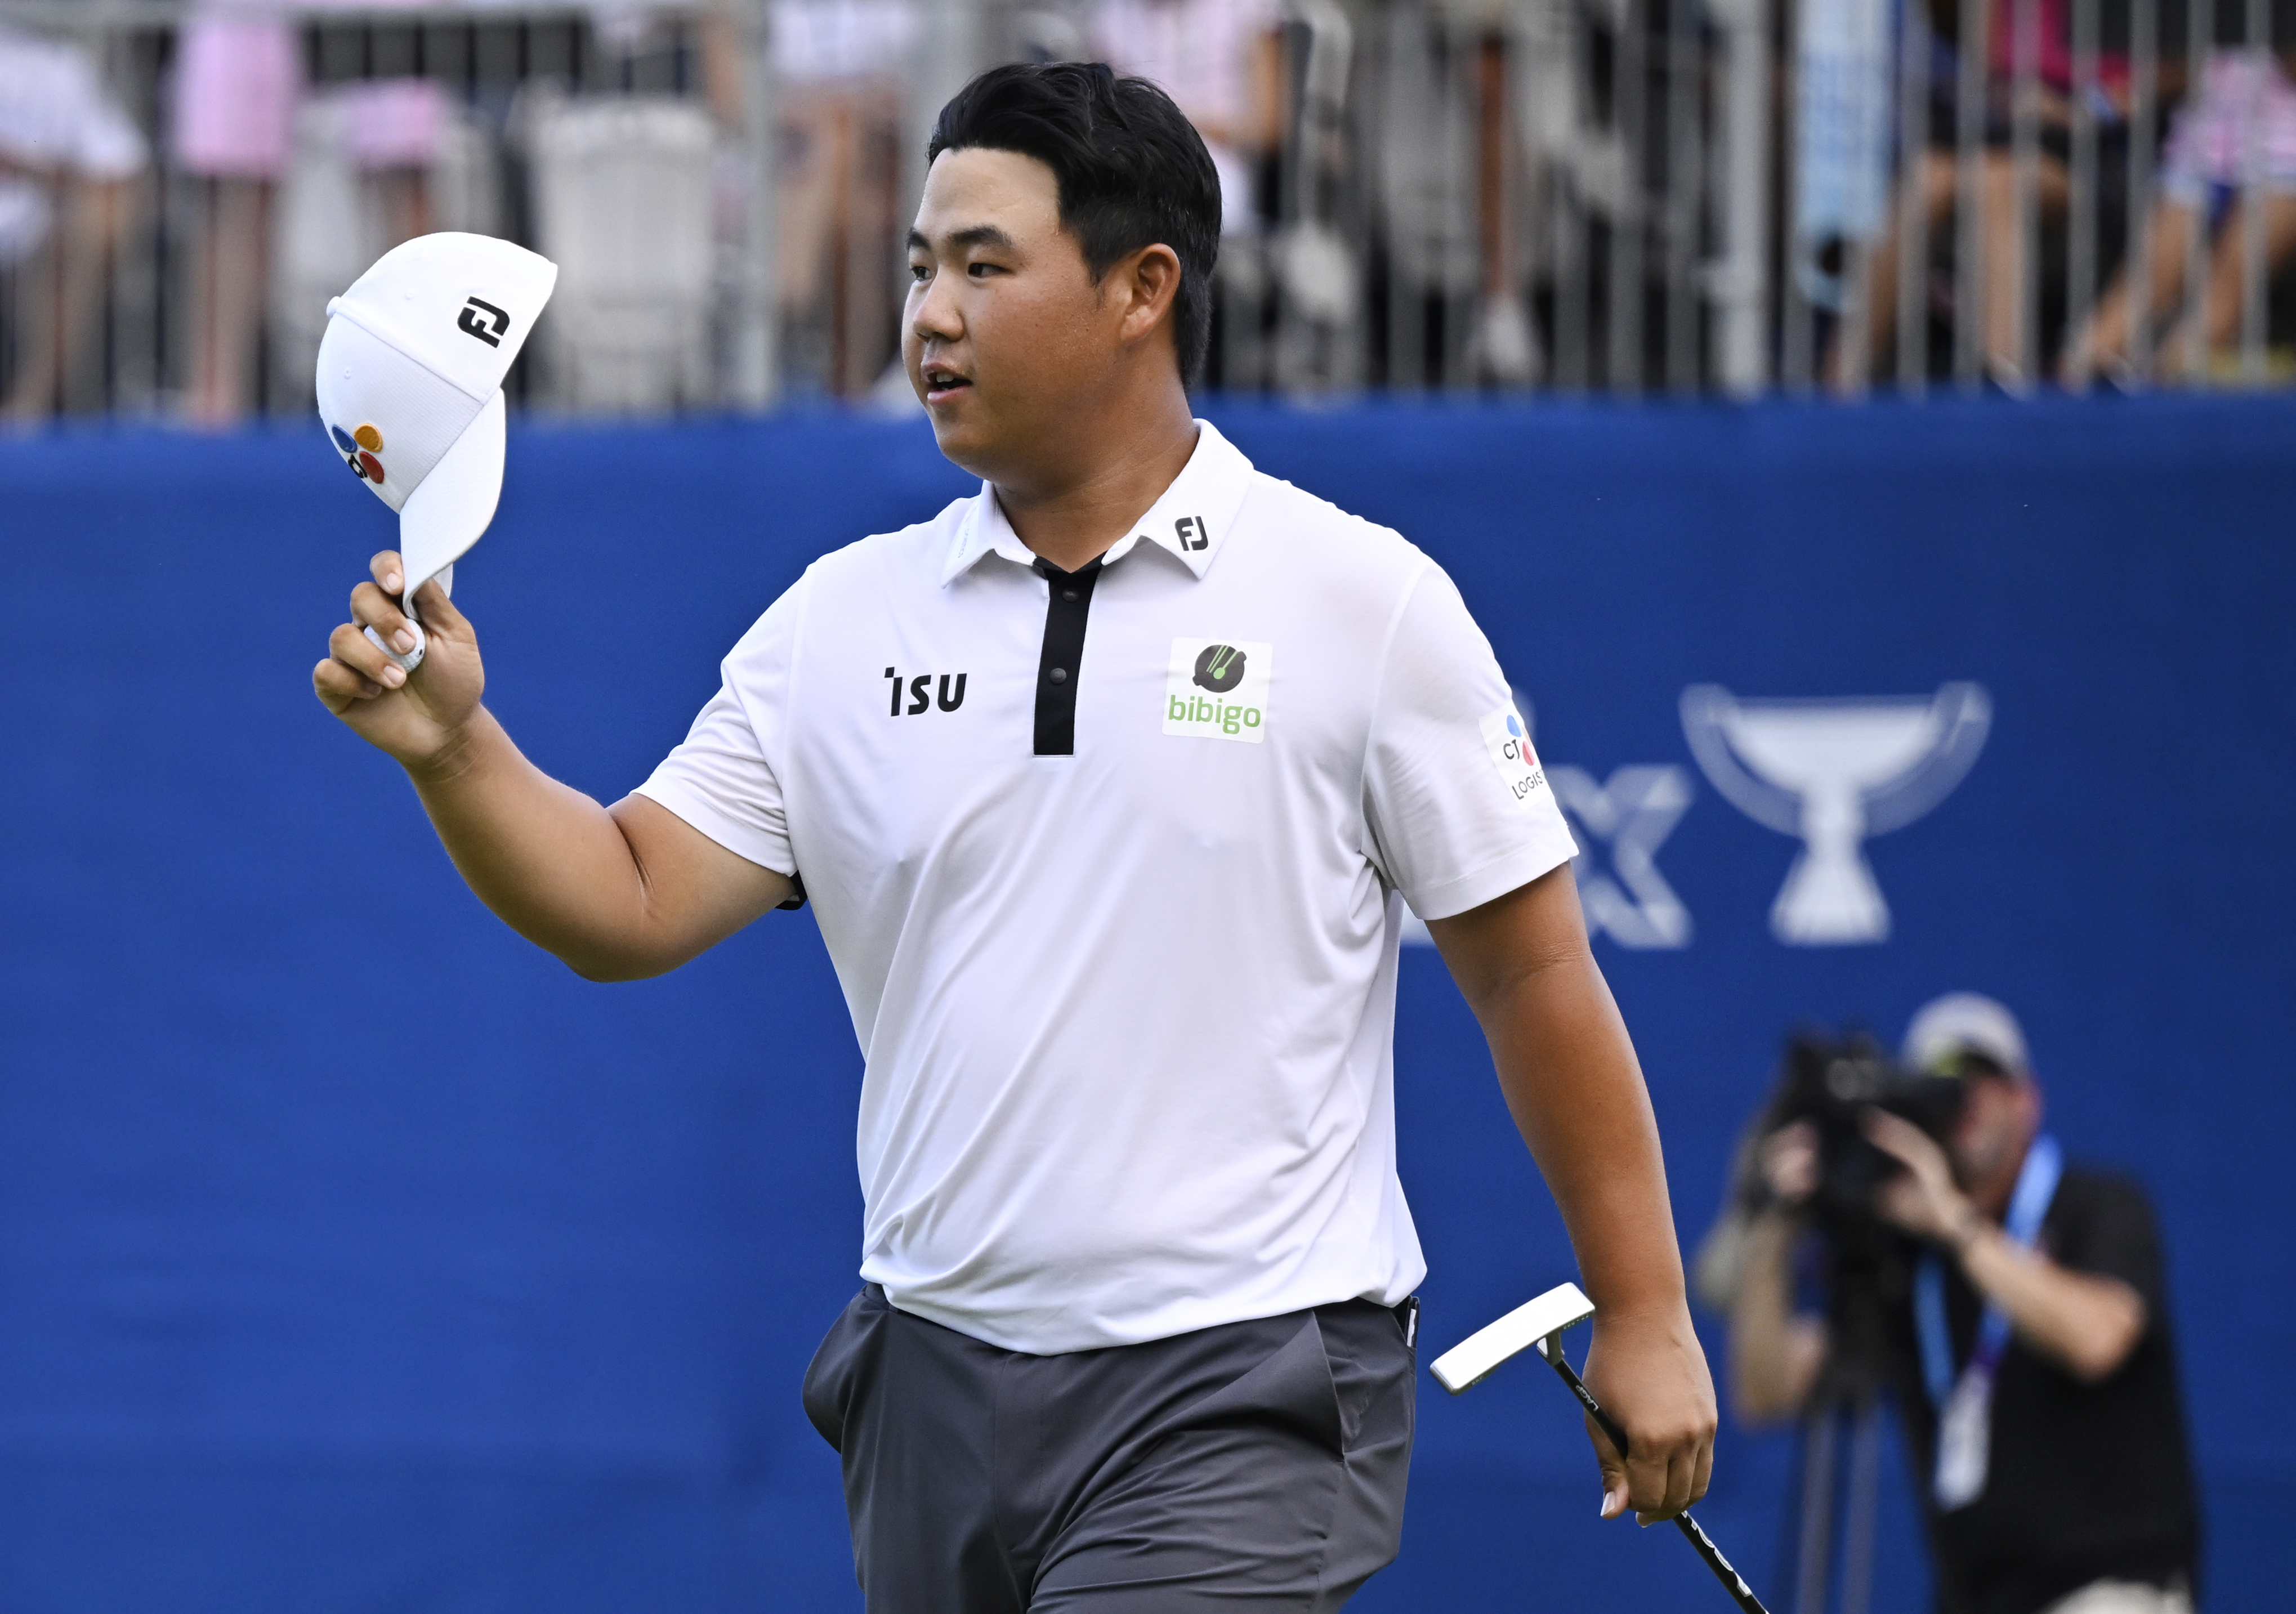 Joohyung Kim of Korea celebrates after putting in to win on the 18th green during the final round of the Wyndham Championship at Sedgefield Country Club on August 07, 2022 in Greensboro, North Carolina.